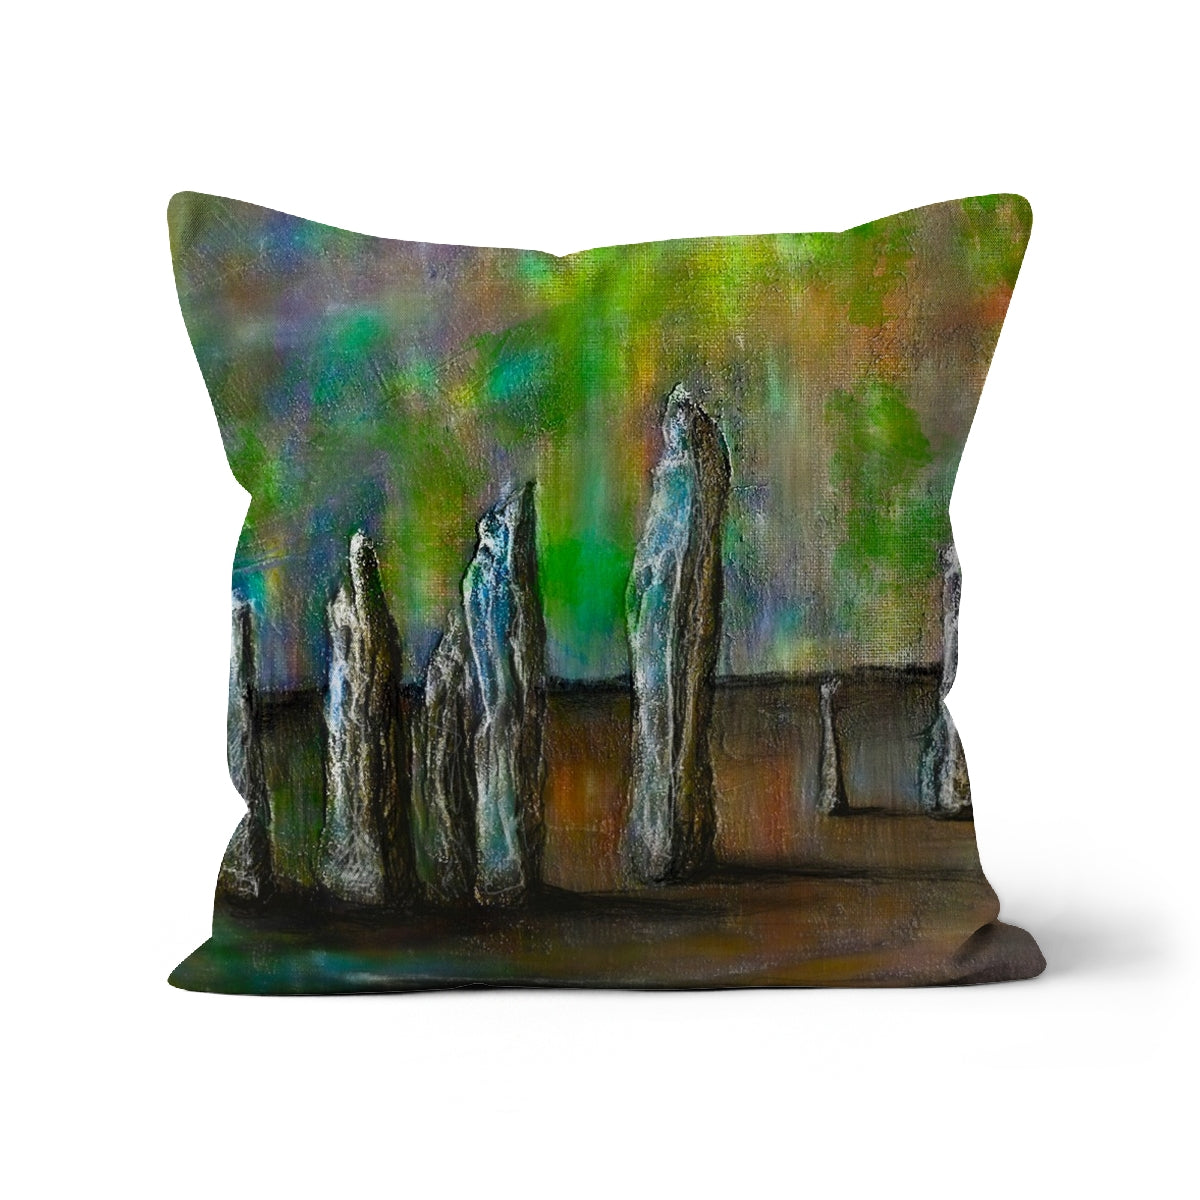 Callanish Northern Lights Art Gifts Cushion-Cushions-Hebridean Islands Art Gallery-Linen-12"x12"-Paintings, Prints, Homeware, Art Gifts From Scotland By Scottish Artist Kevin Hunter